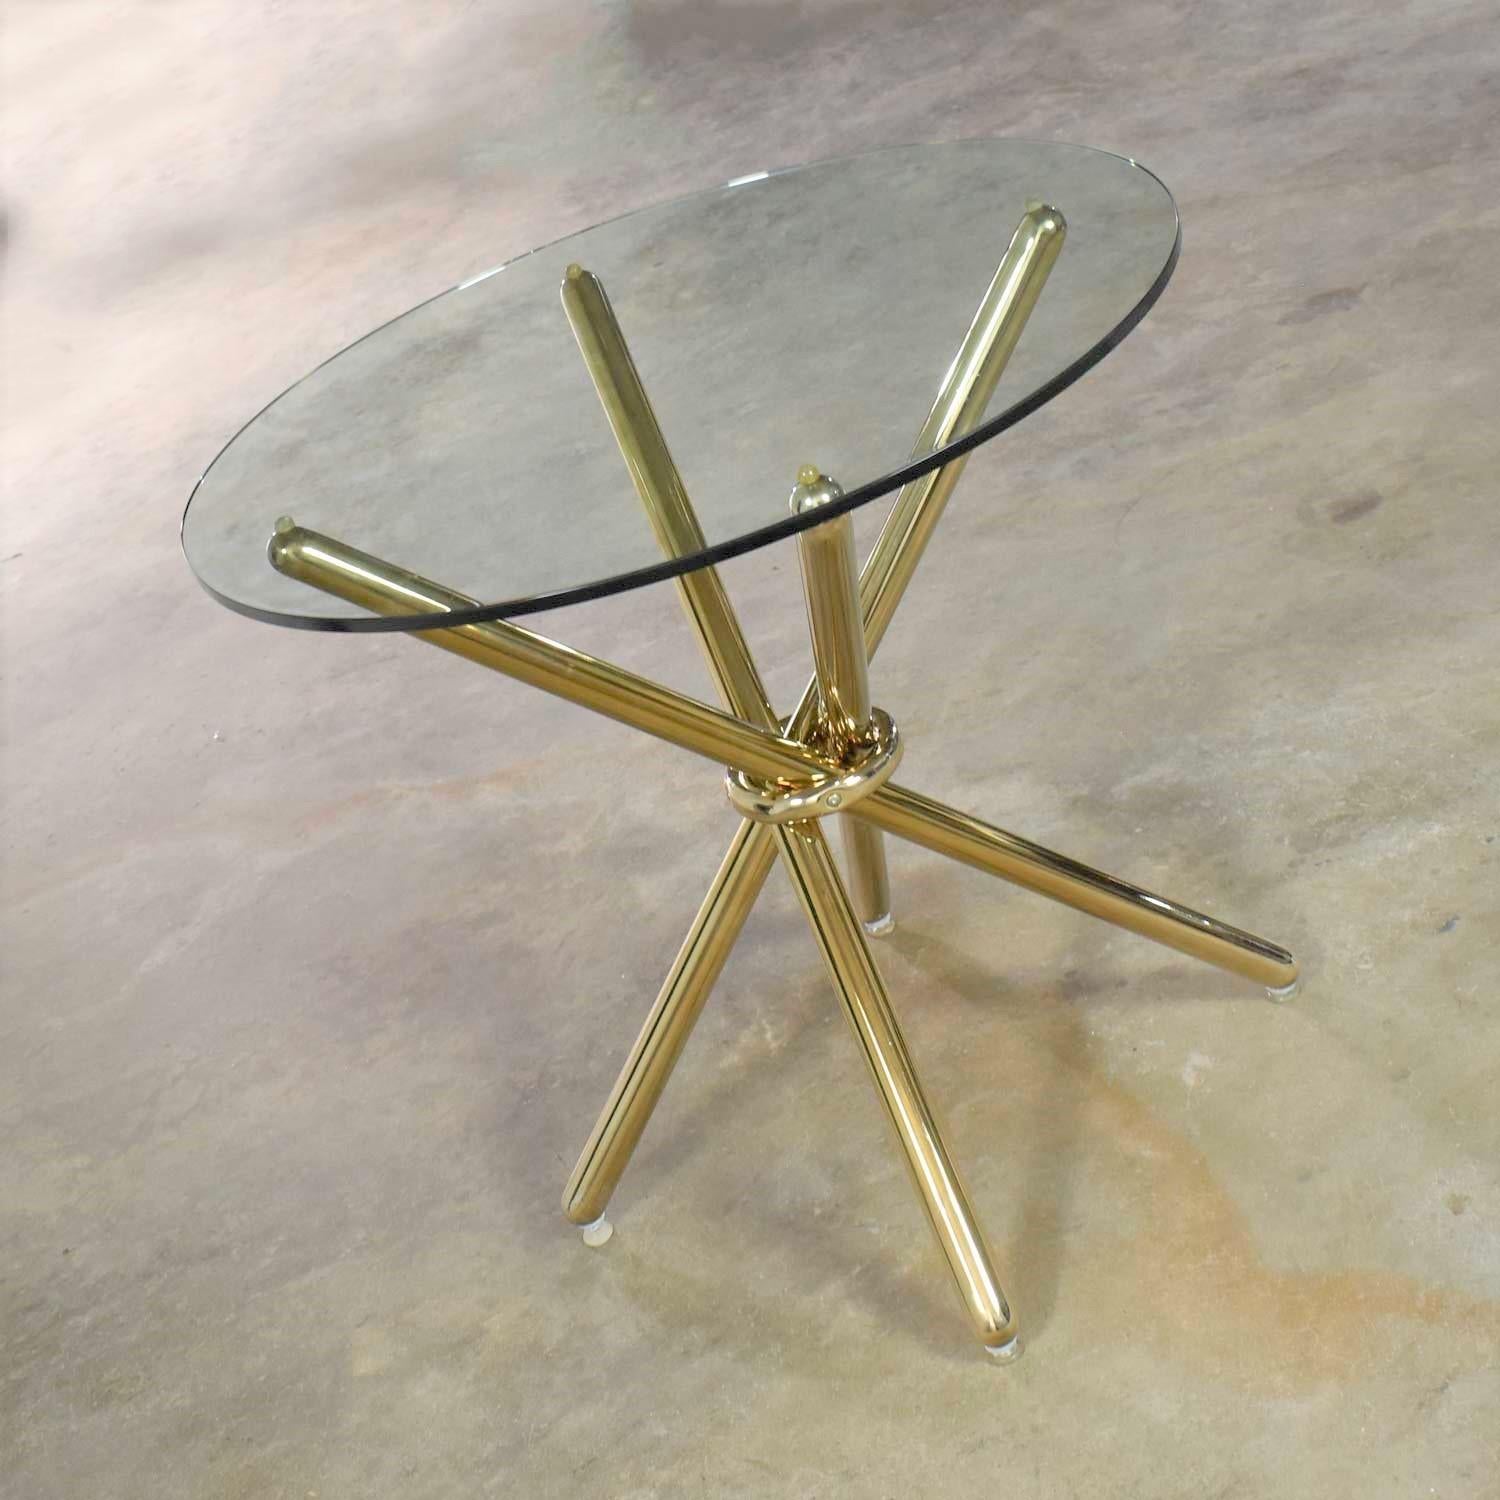 Vintage Modern Brass-Plated Jax Center or End Table with Round Glass Top 5